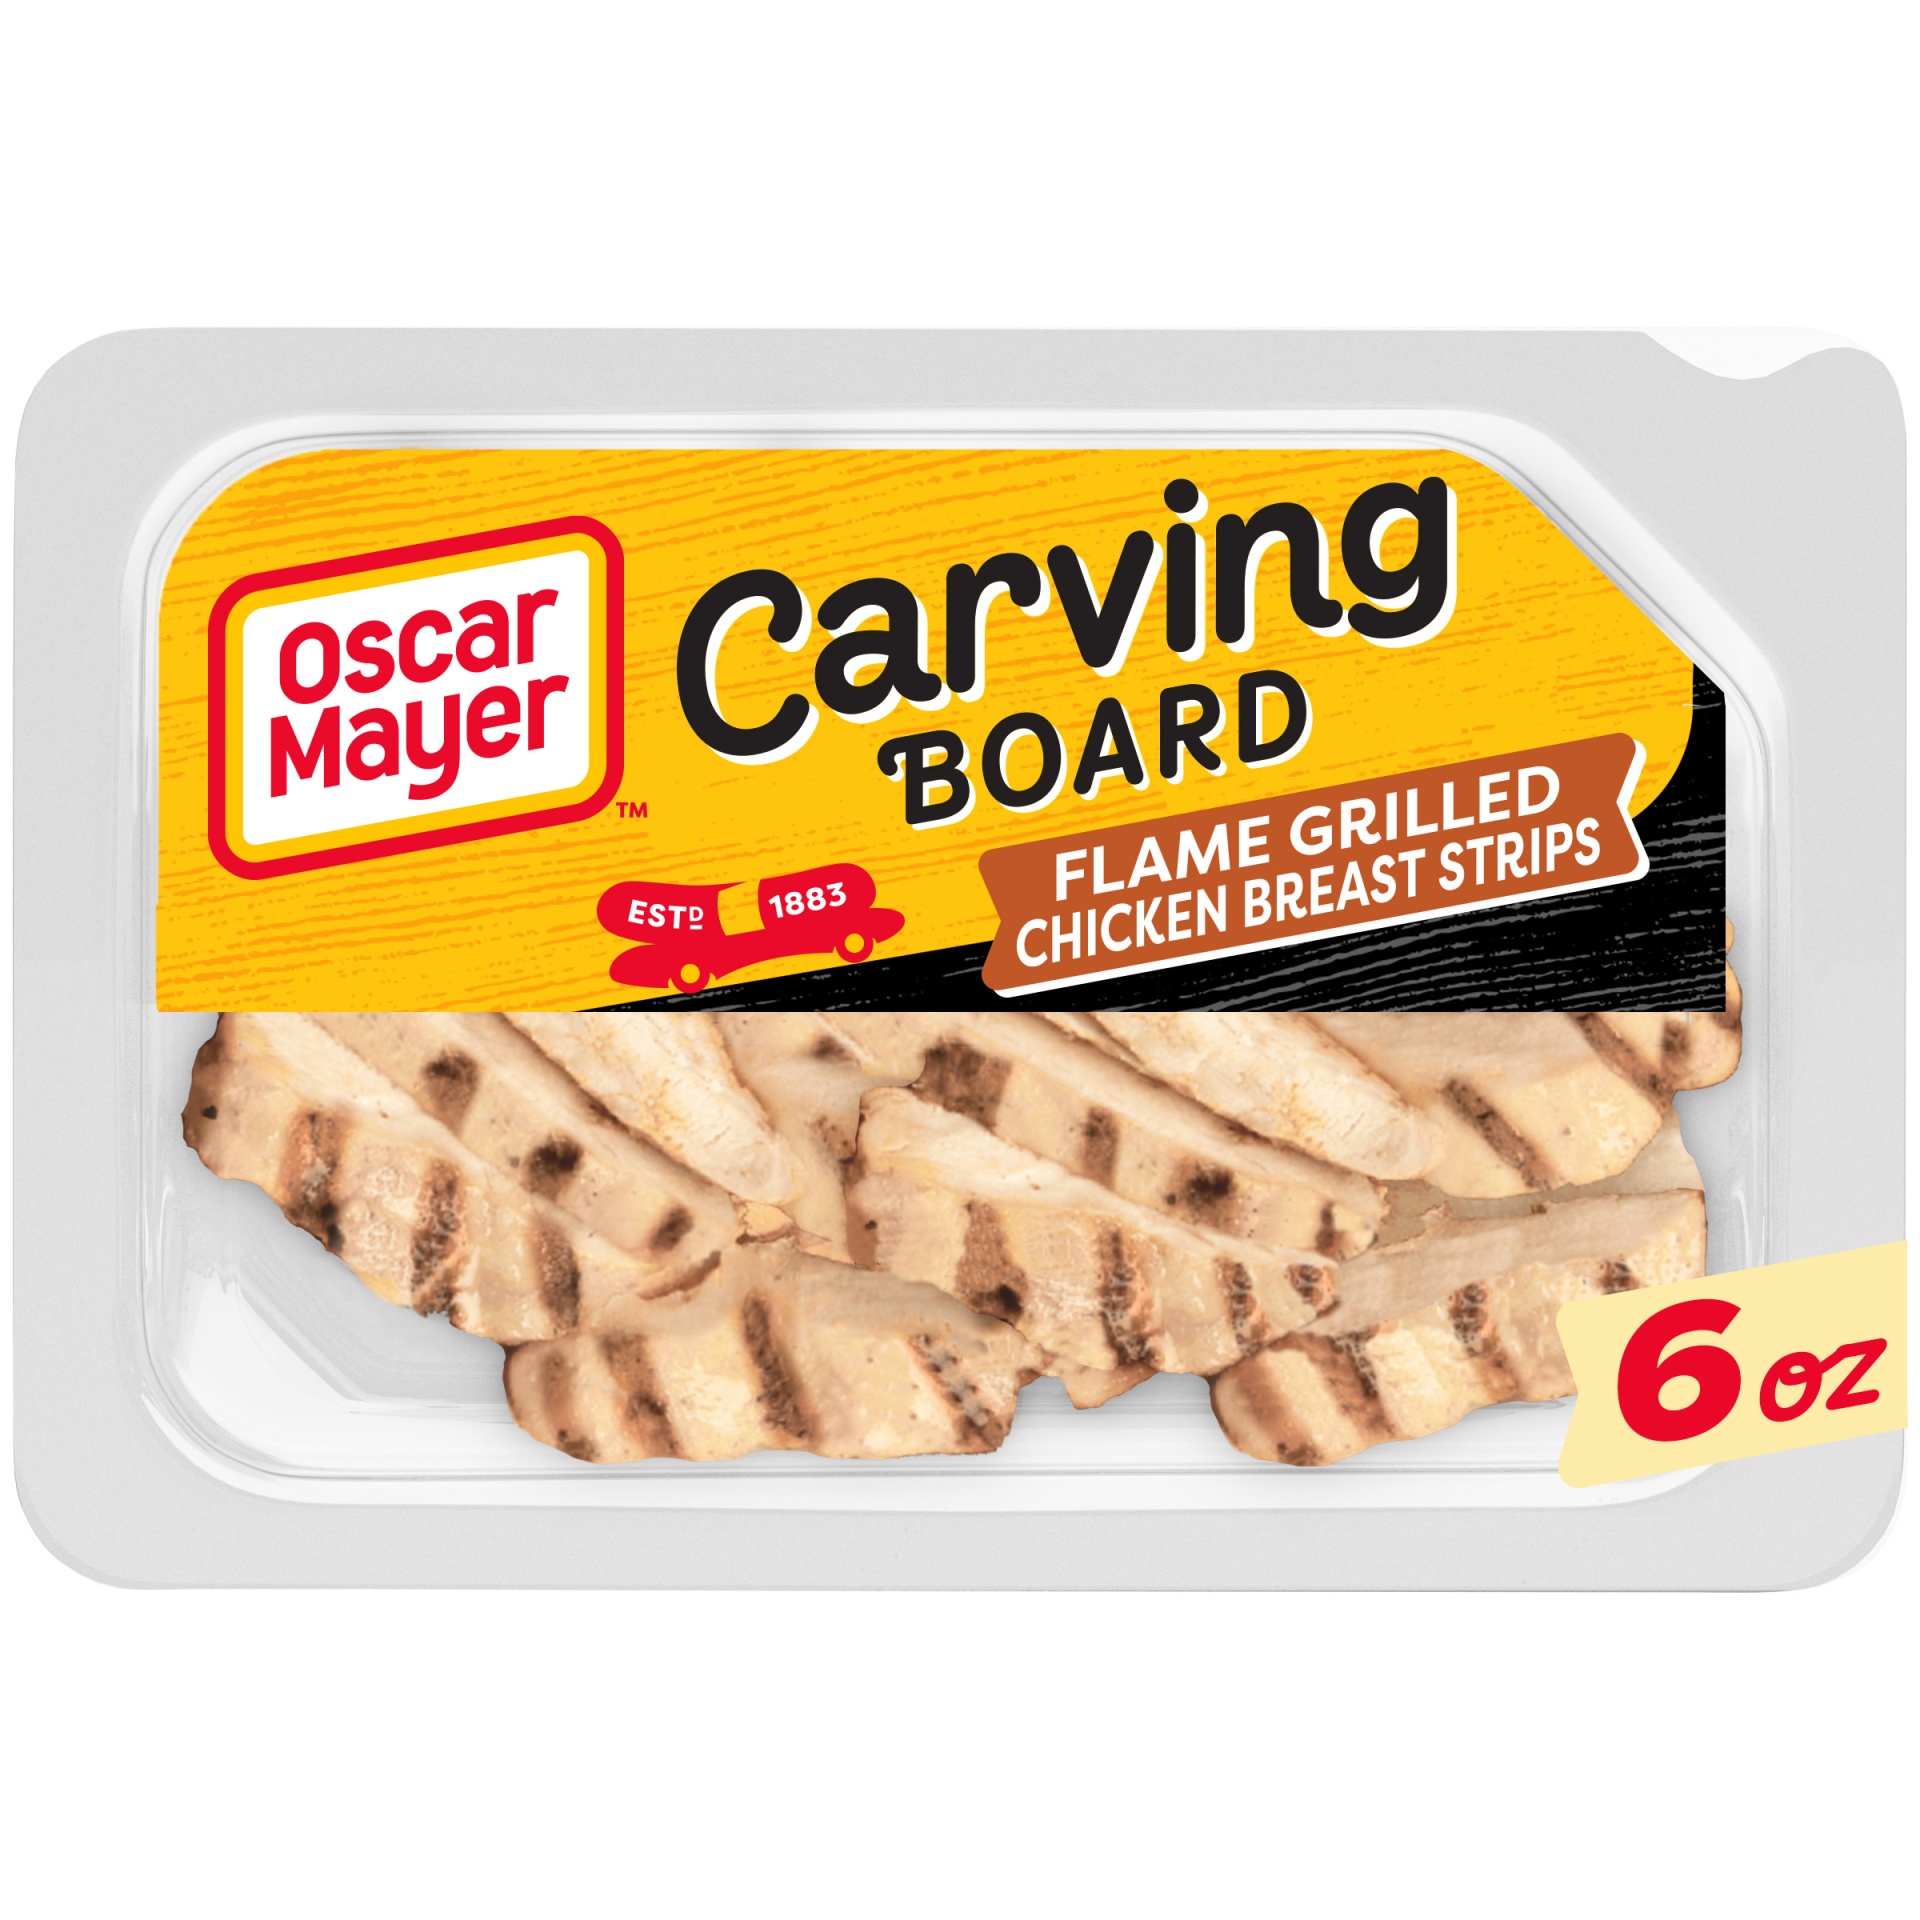 slide 1 of 2, Oscar Mayer Carving Board Flame Grilled Chicken Breast Strips Lunch Meat Tray, 6 oz